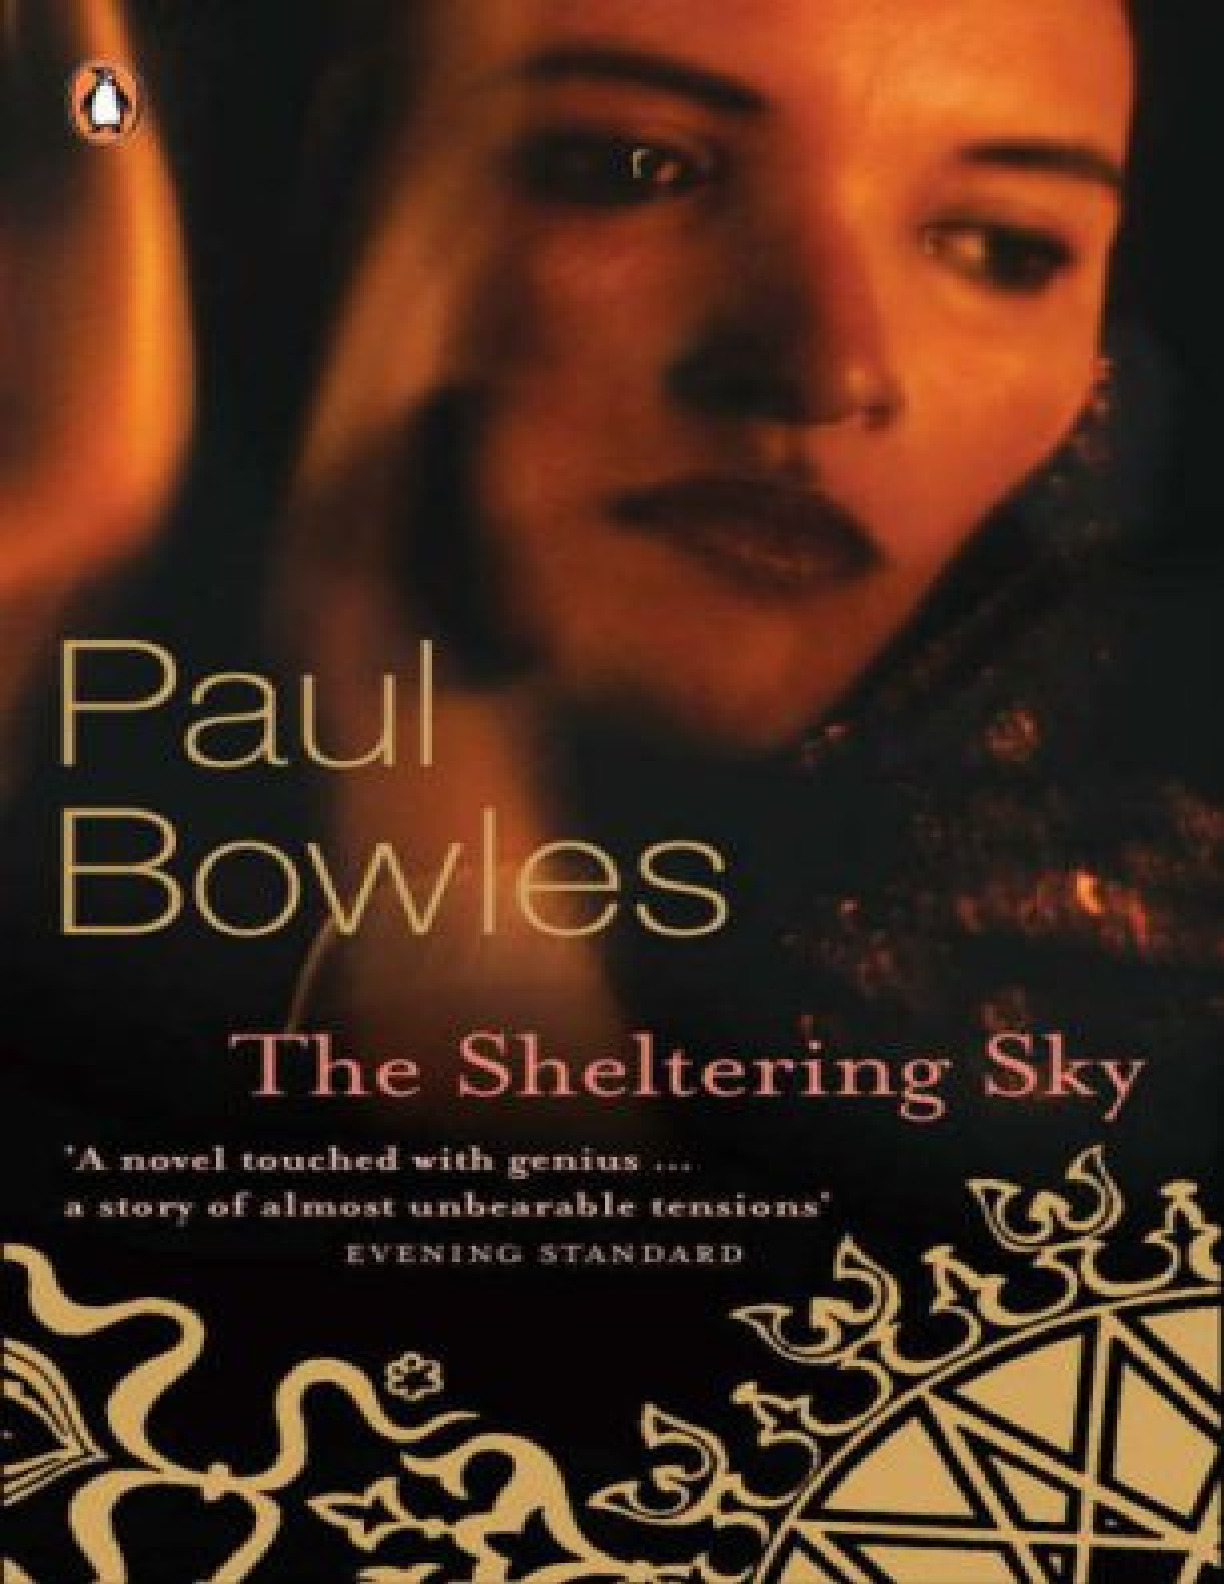 Sheltering Sky, The – Paul Bowles